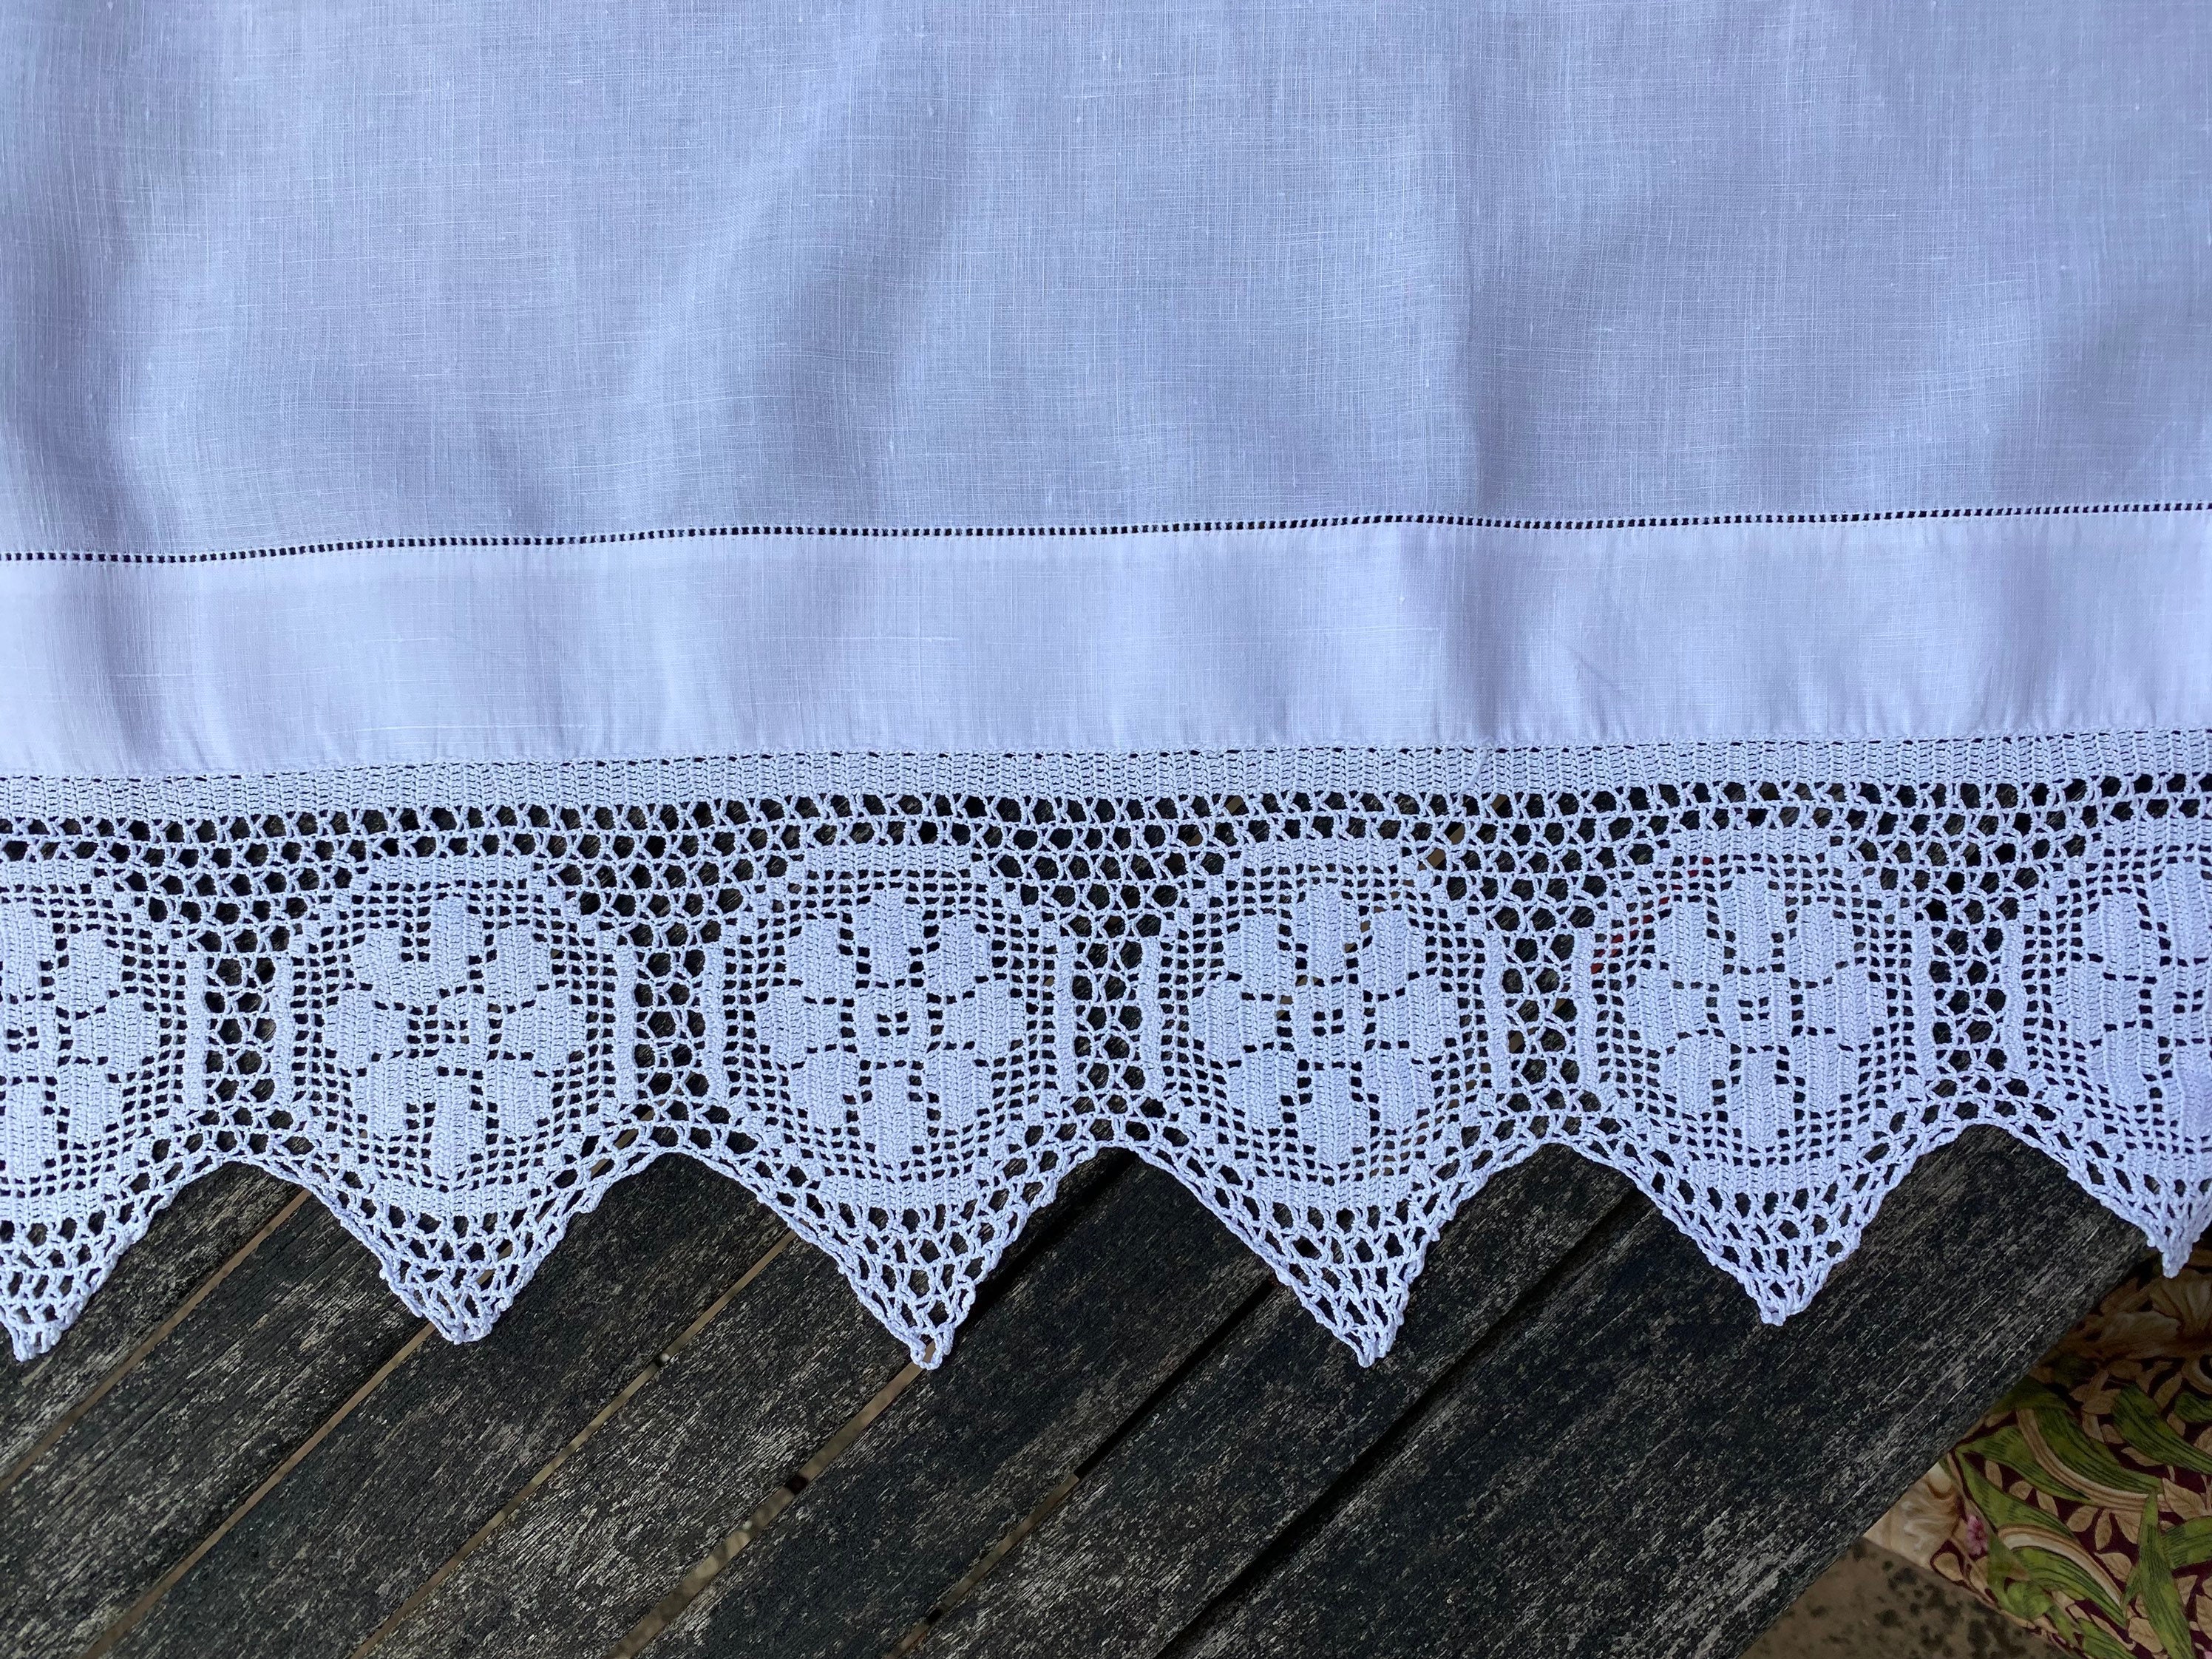 White Cotton Tablecloth with Filet Crochet Border - Etsy 日本